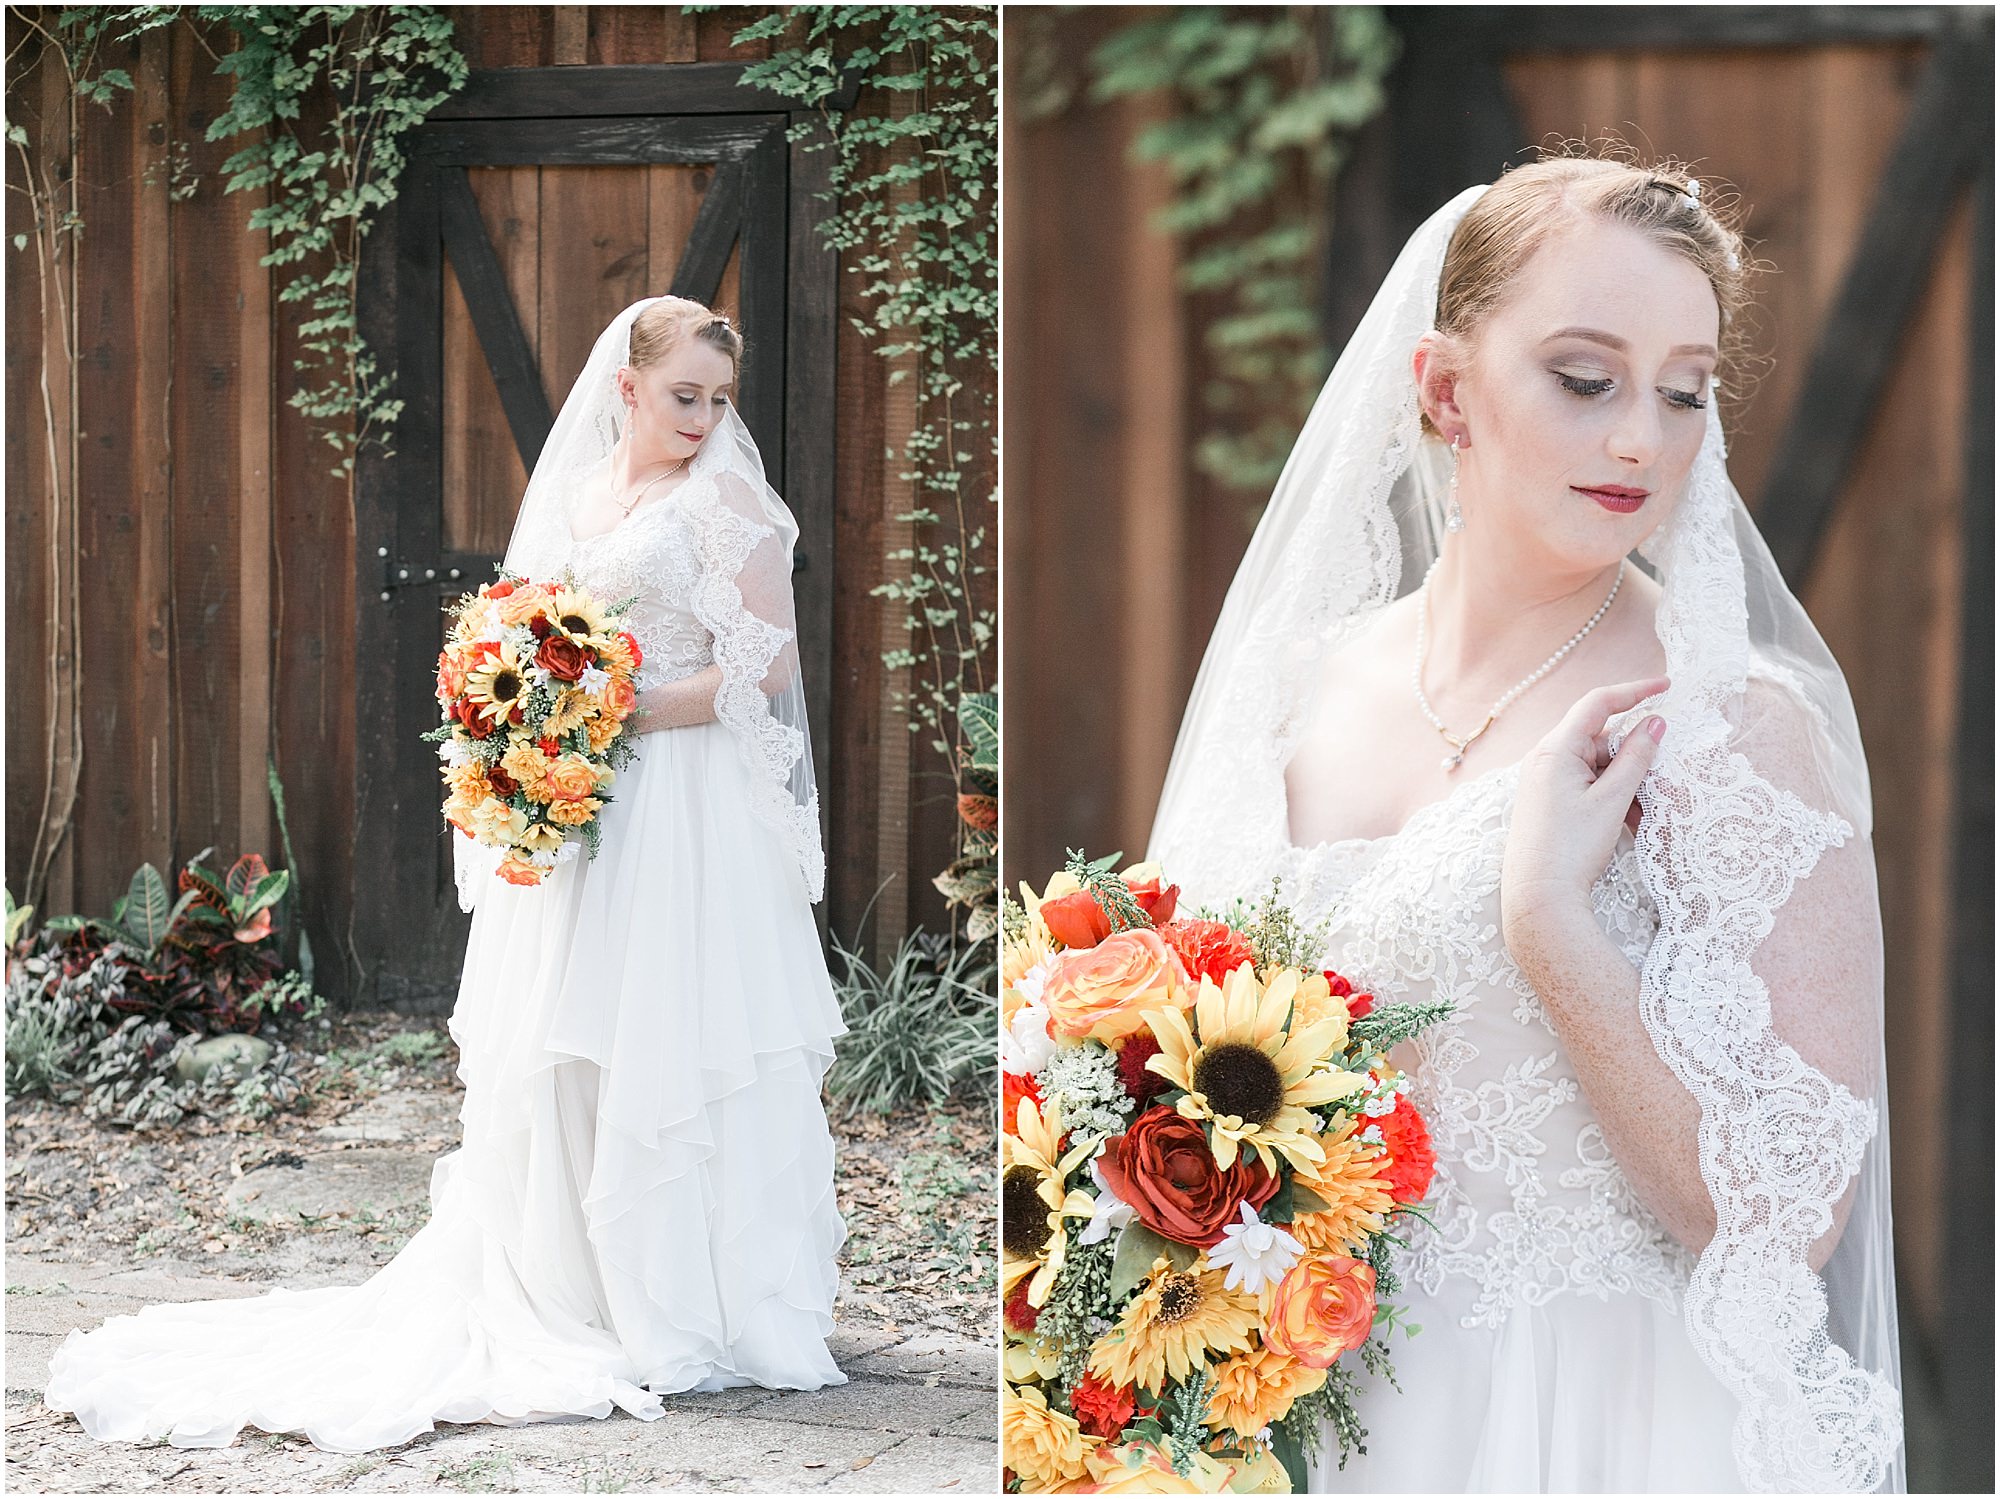 Bride's portraits in her wedding dress standing in front of a barn